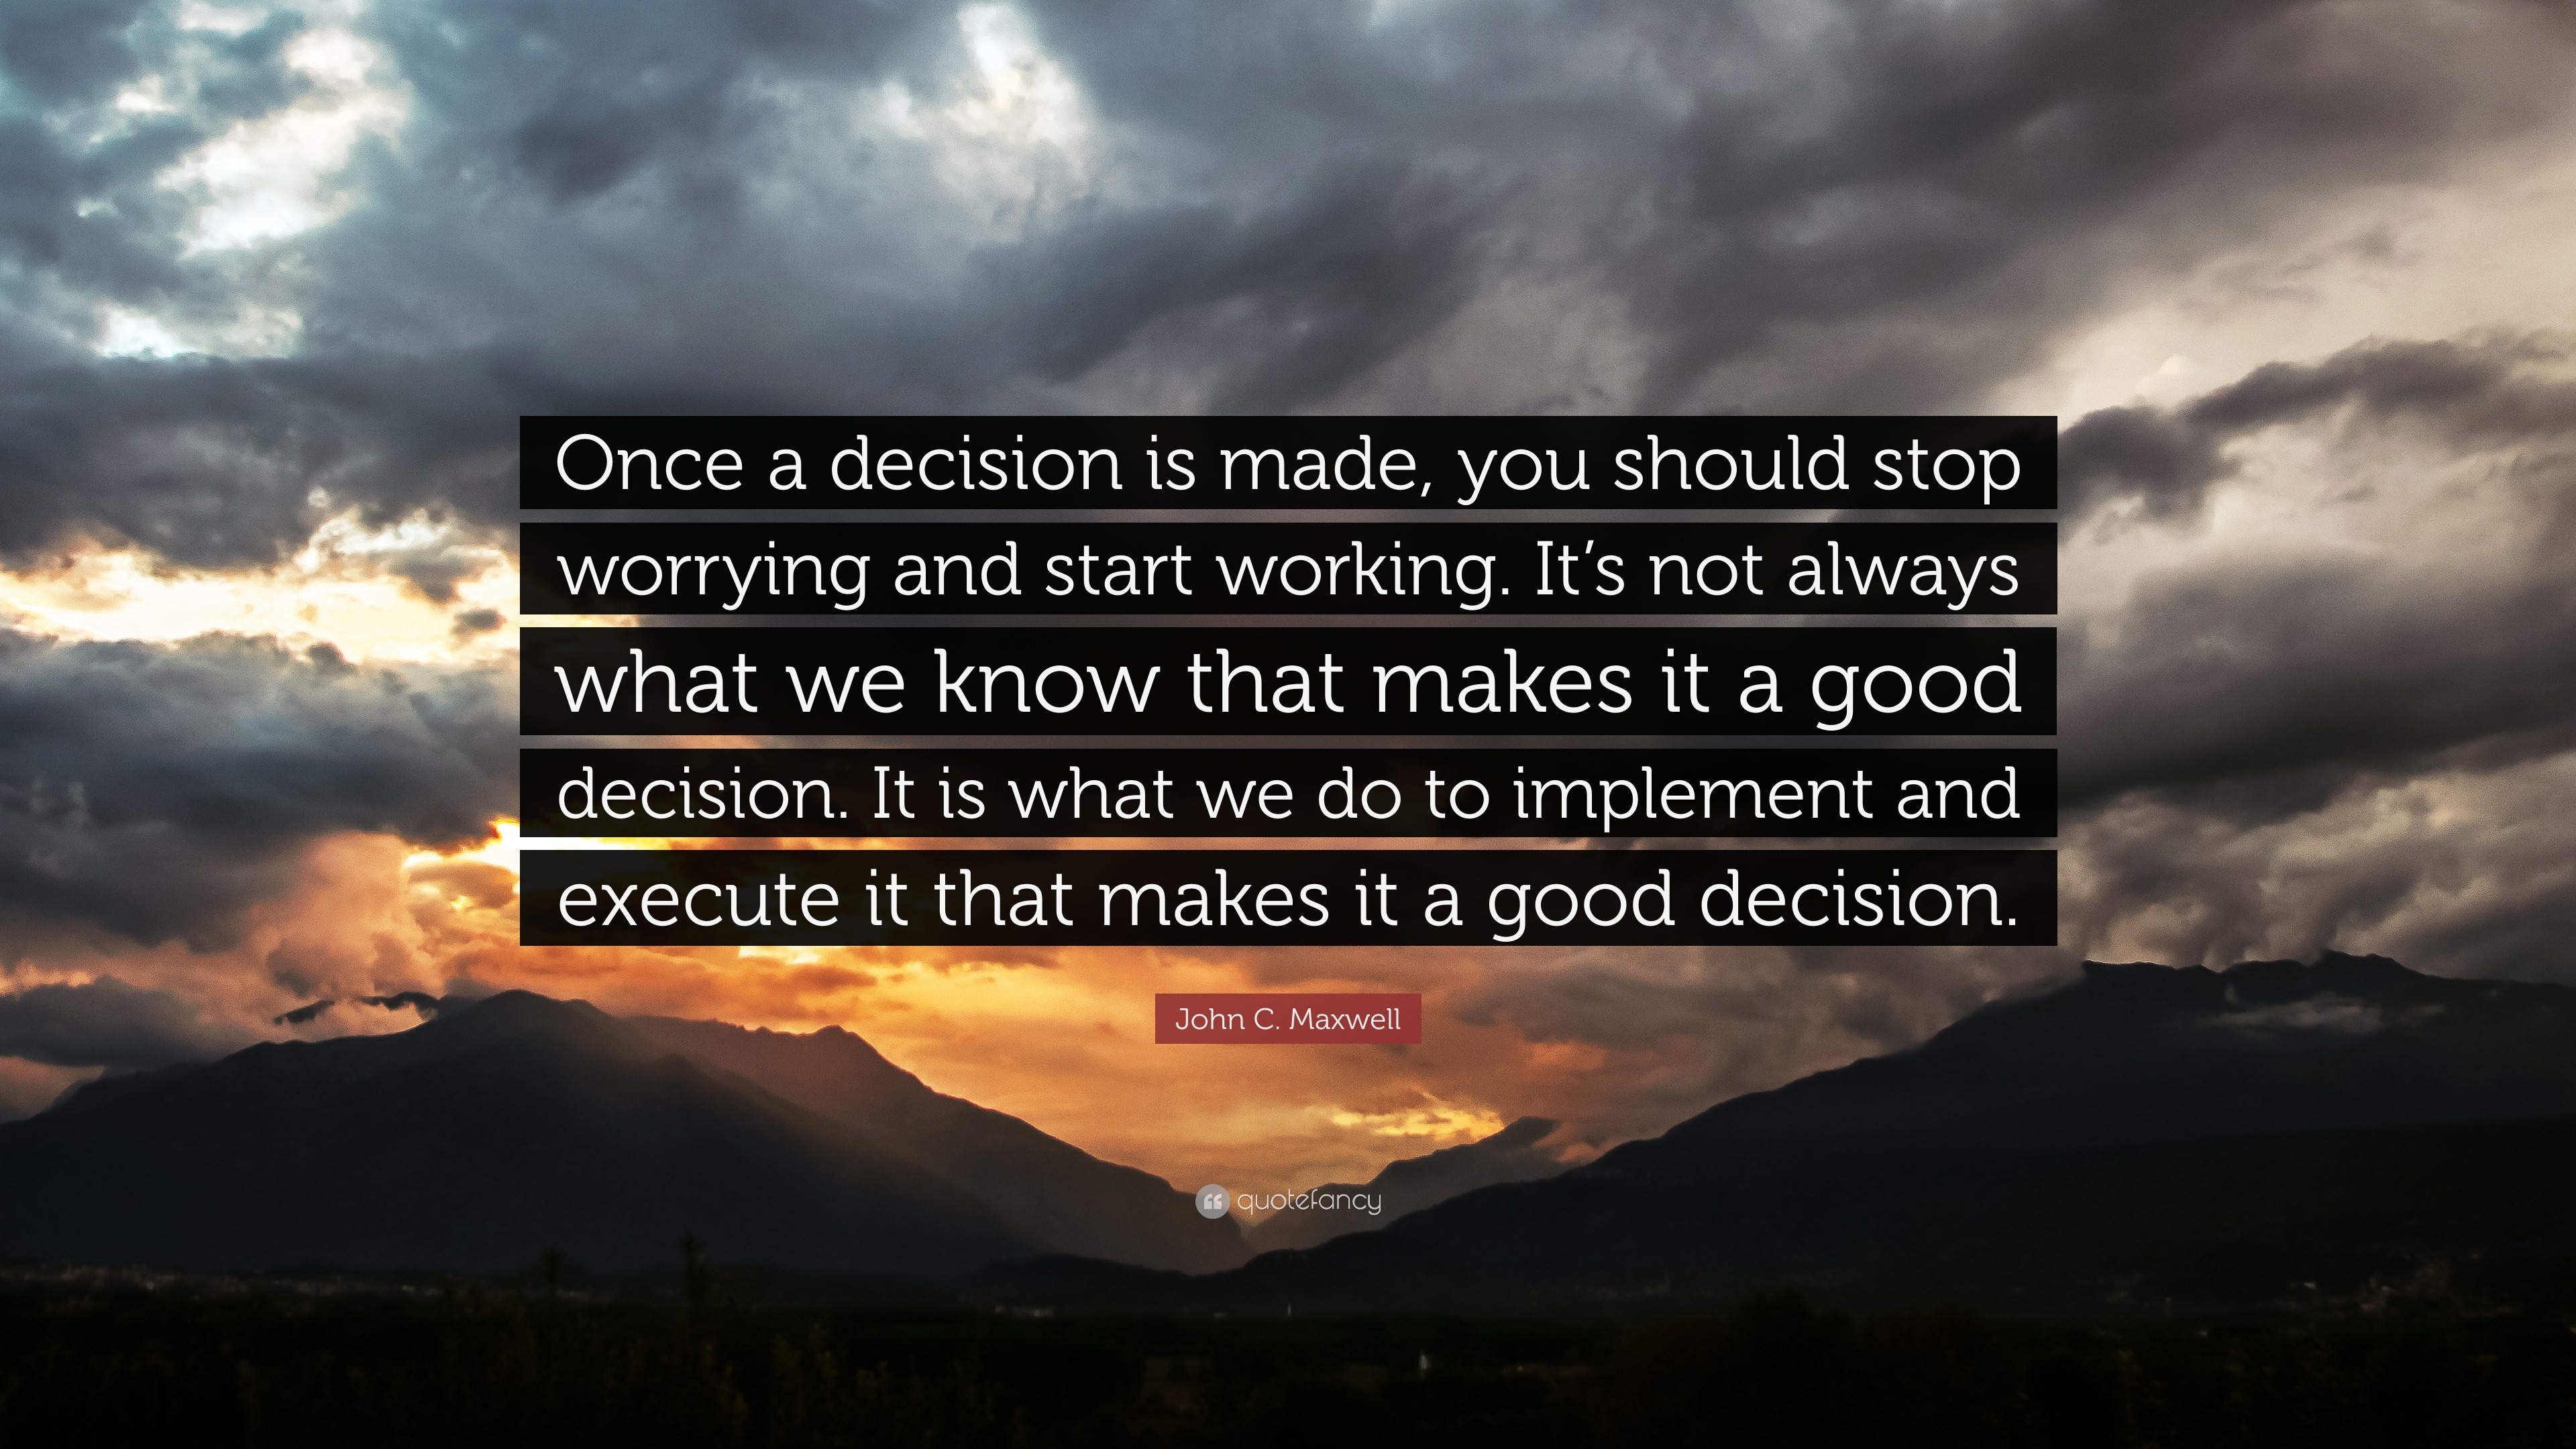 13 Quotes About Making Life Choices